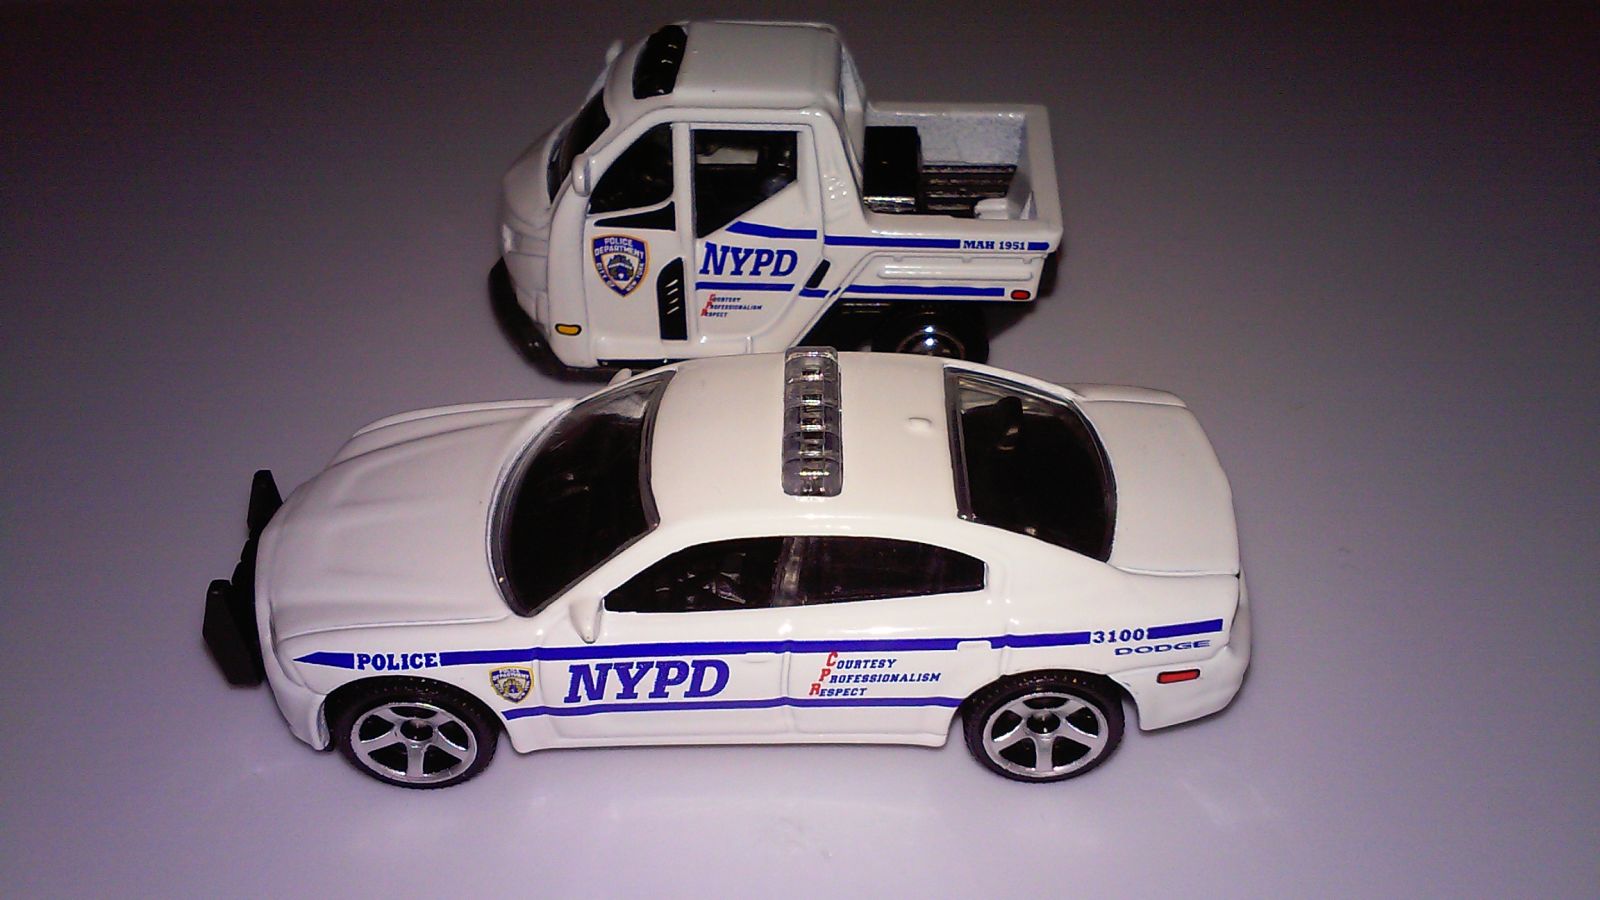 Illustration for article titled Matchbox NYPD Dodge Charger and NYPD Meter Maid.